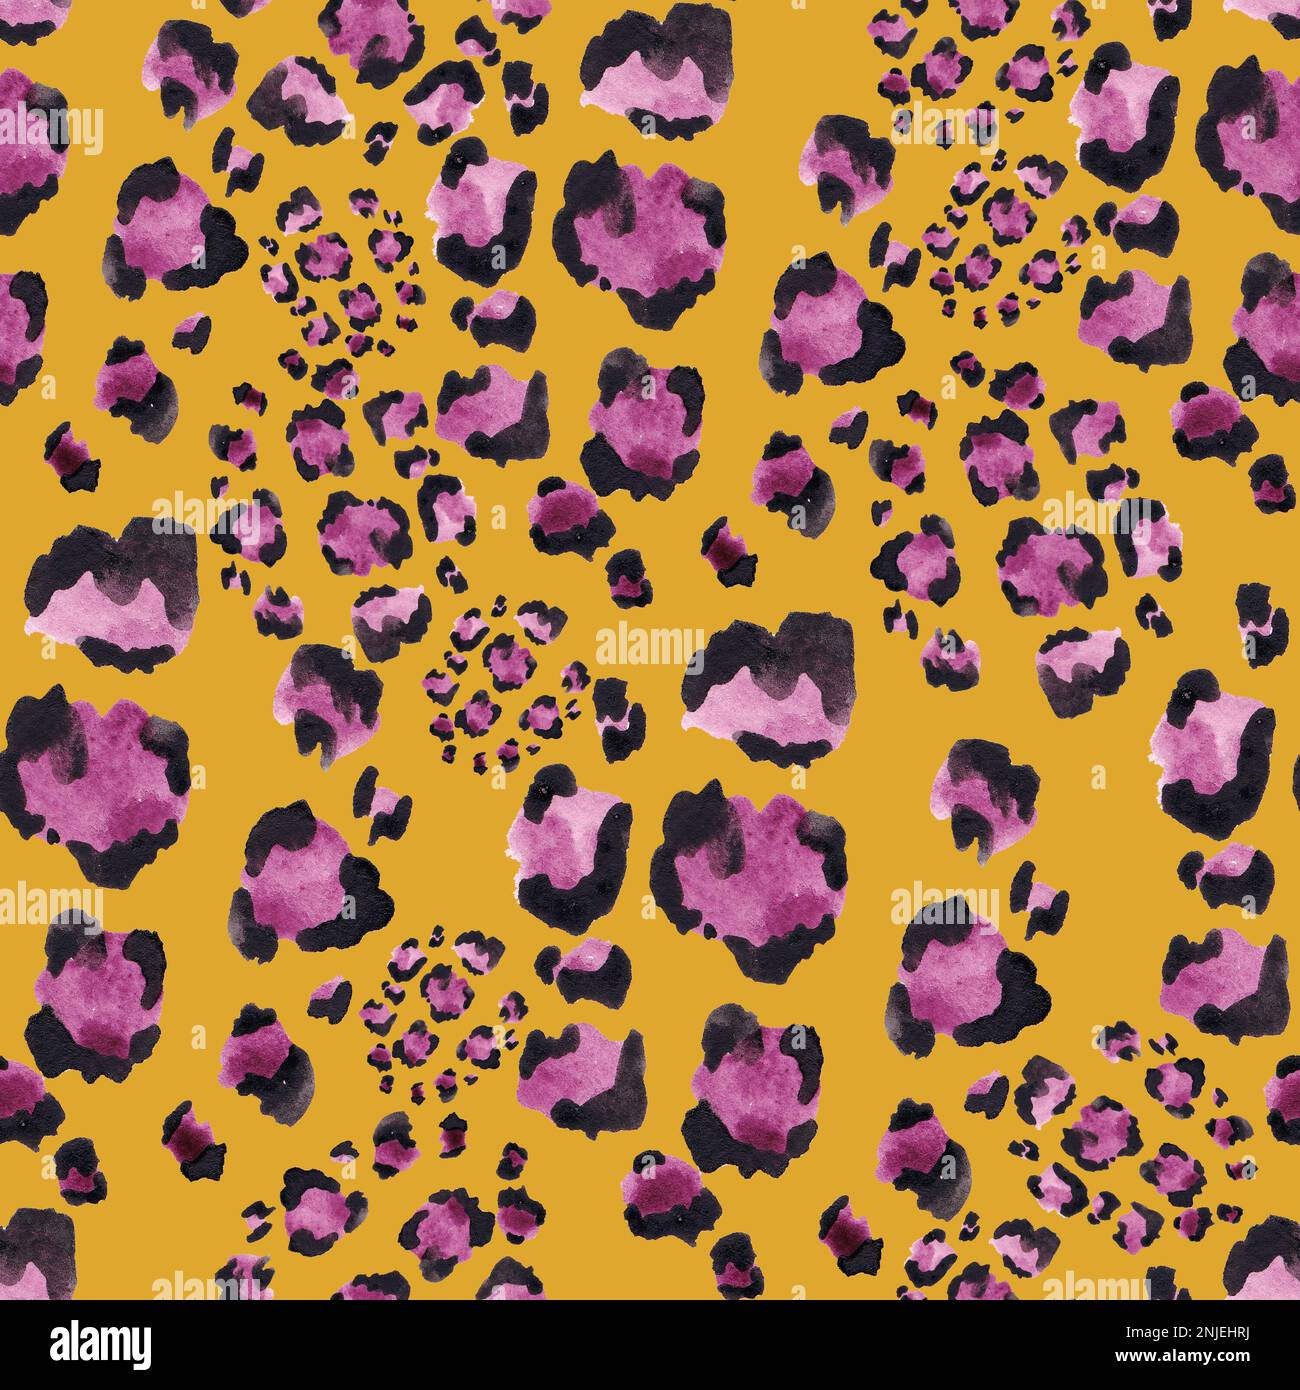 Watercolor abstract pattern with spots in the leopard style of purple color on a yellow background for design Stock Photo